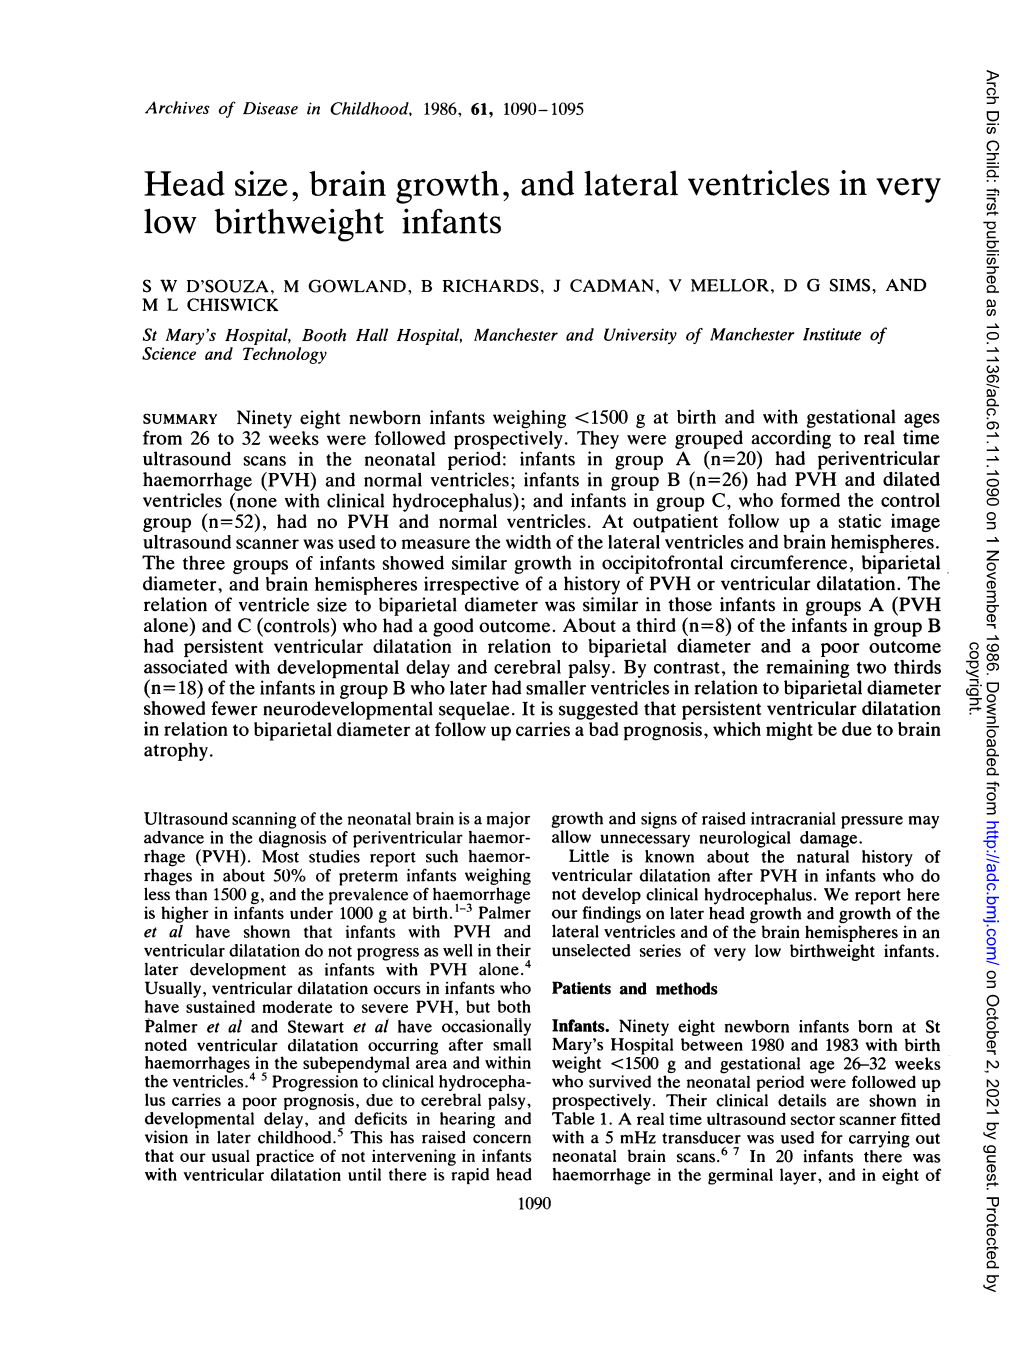 Head Size, Brain Growth, and Lateral Ventricles in Very Low Birthweight Infants